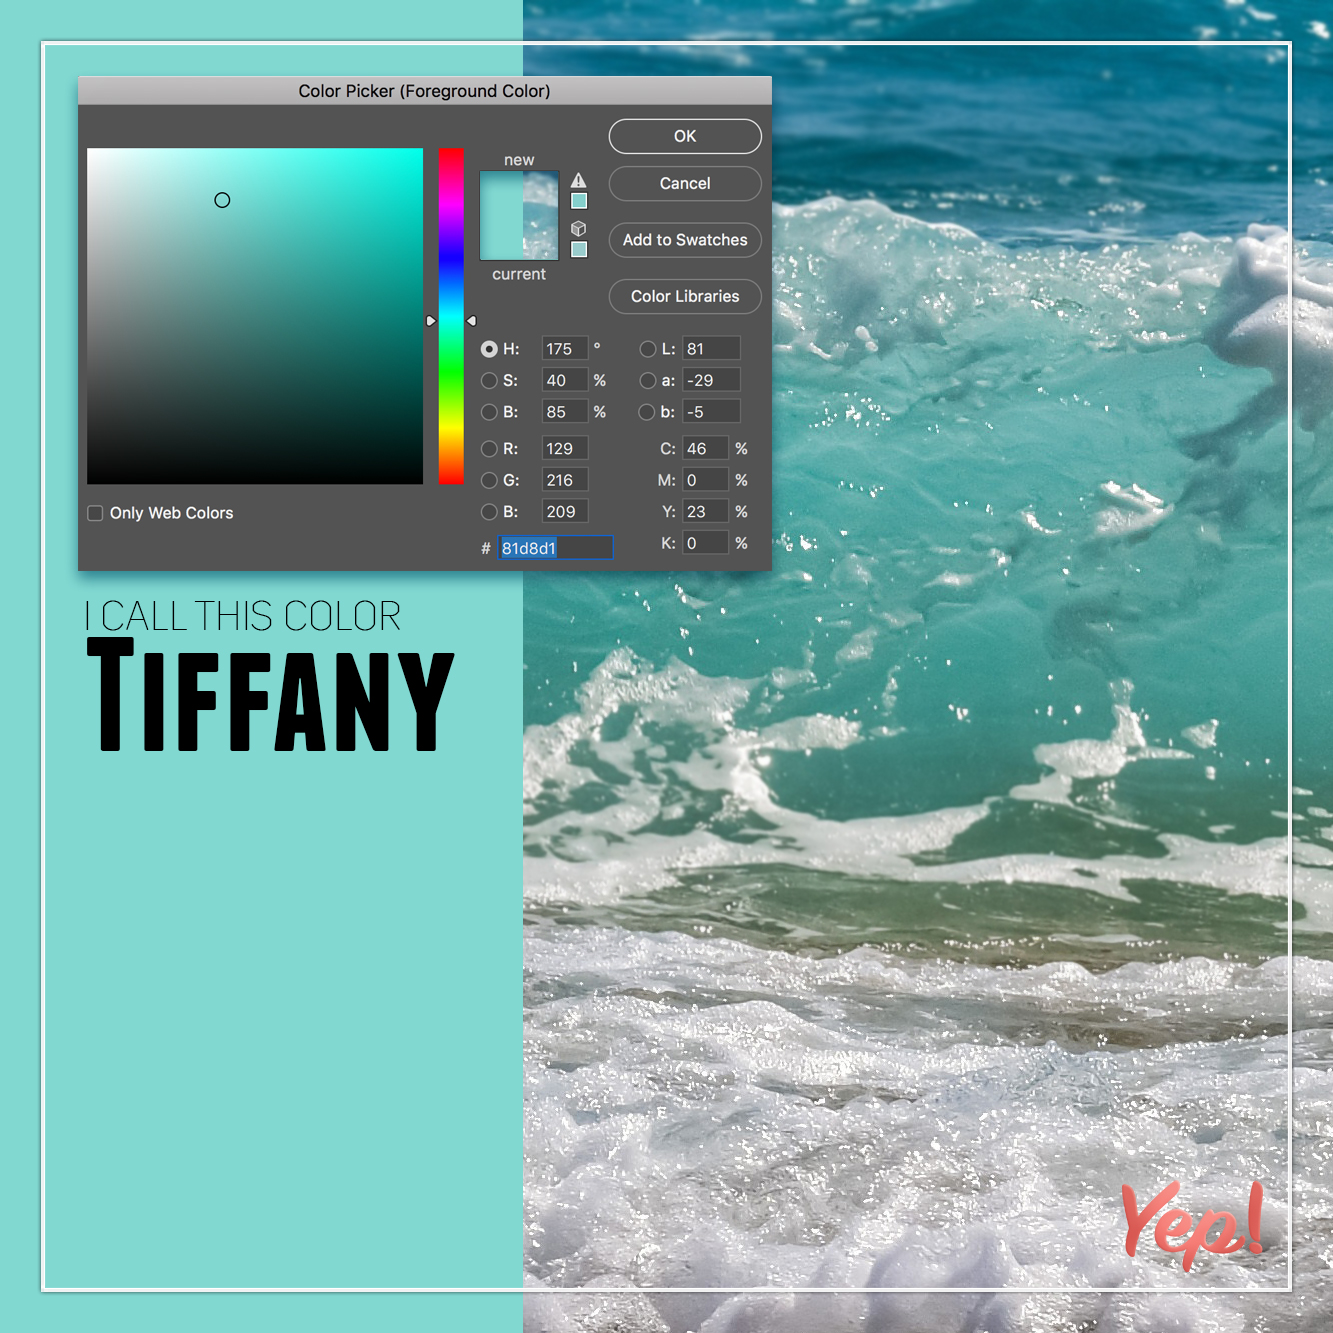 water resources - Cancel Add to Swatches Color Ubraries Oh 175 5 42 Asc R 139 Cg 210 200 Bloed LB1 29 6 ce No Only Web Colors I Call This Color Tiffany You